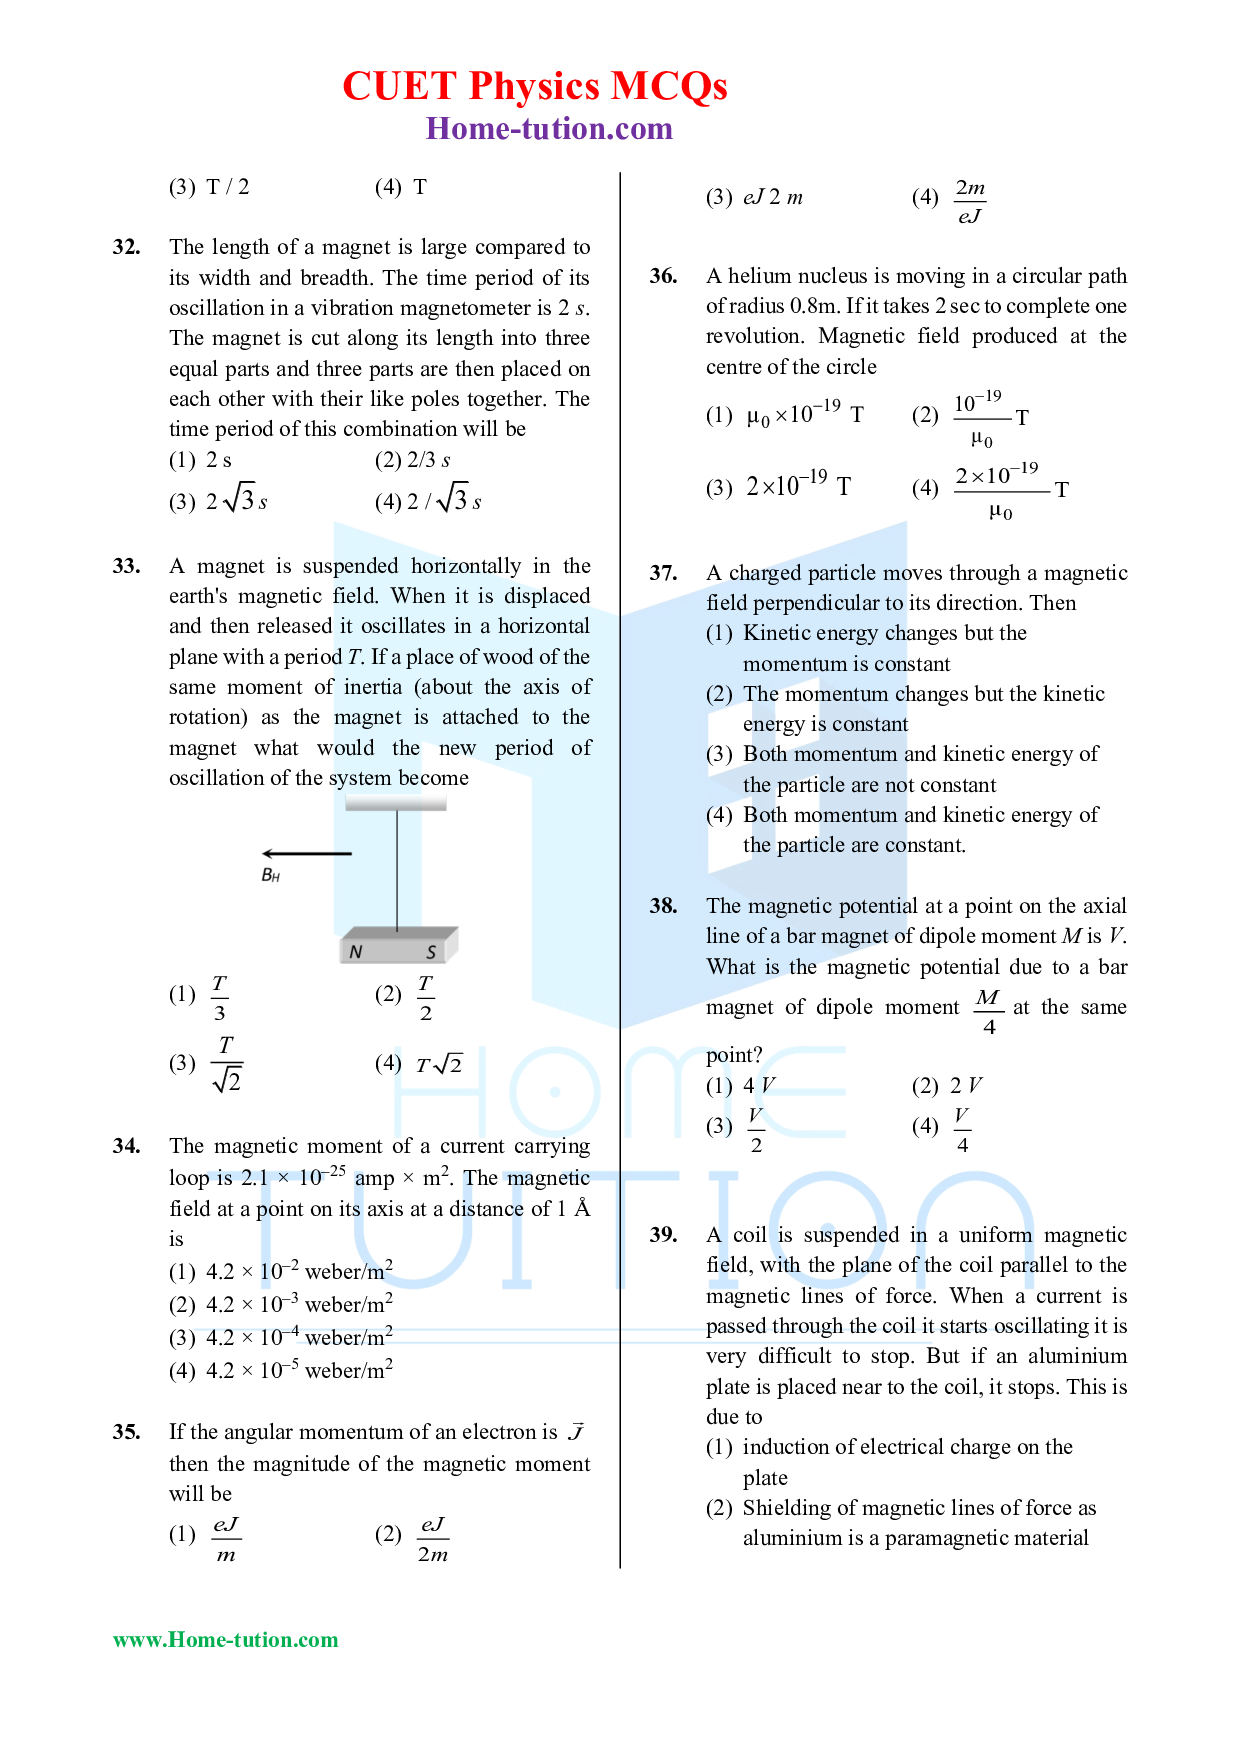 CUET MCQ Questions For Physics Chapter-05 Magnetism and Bar Magnet